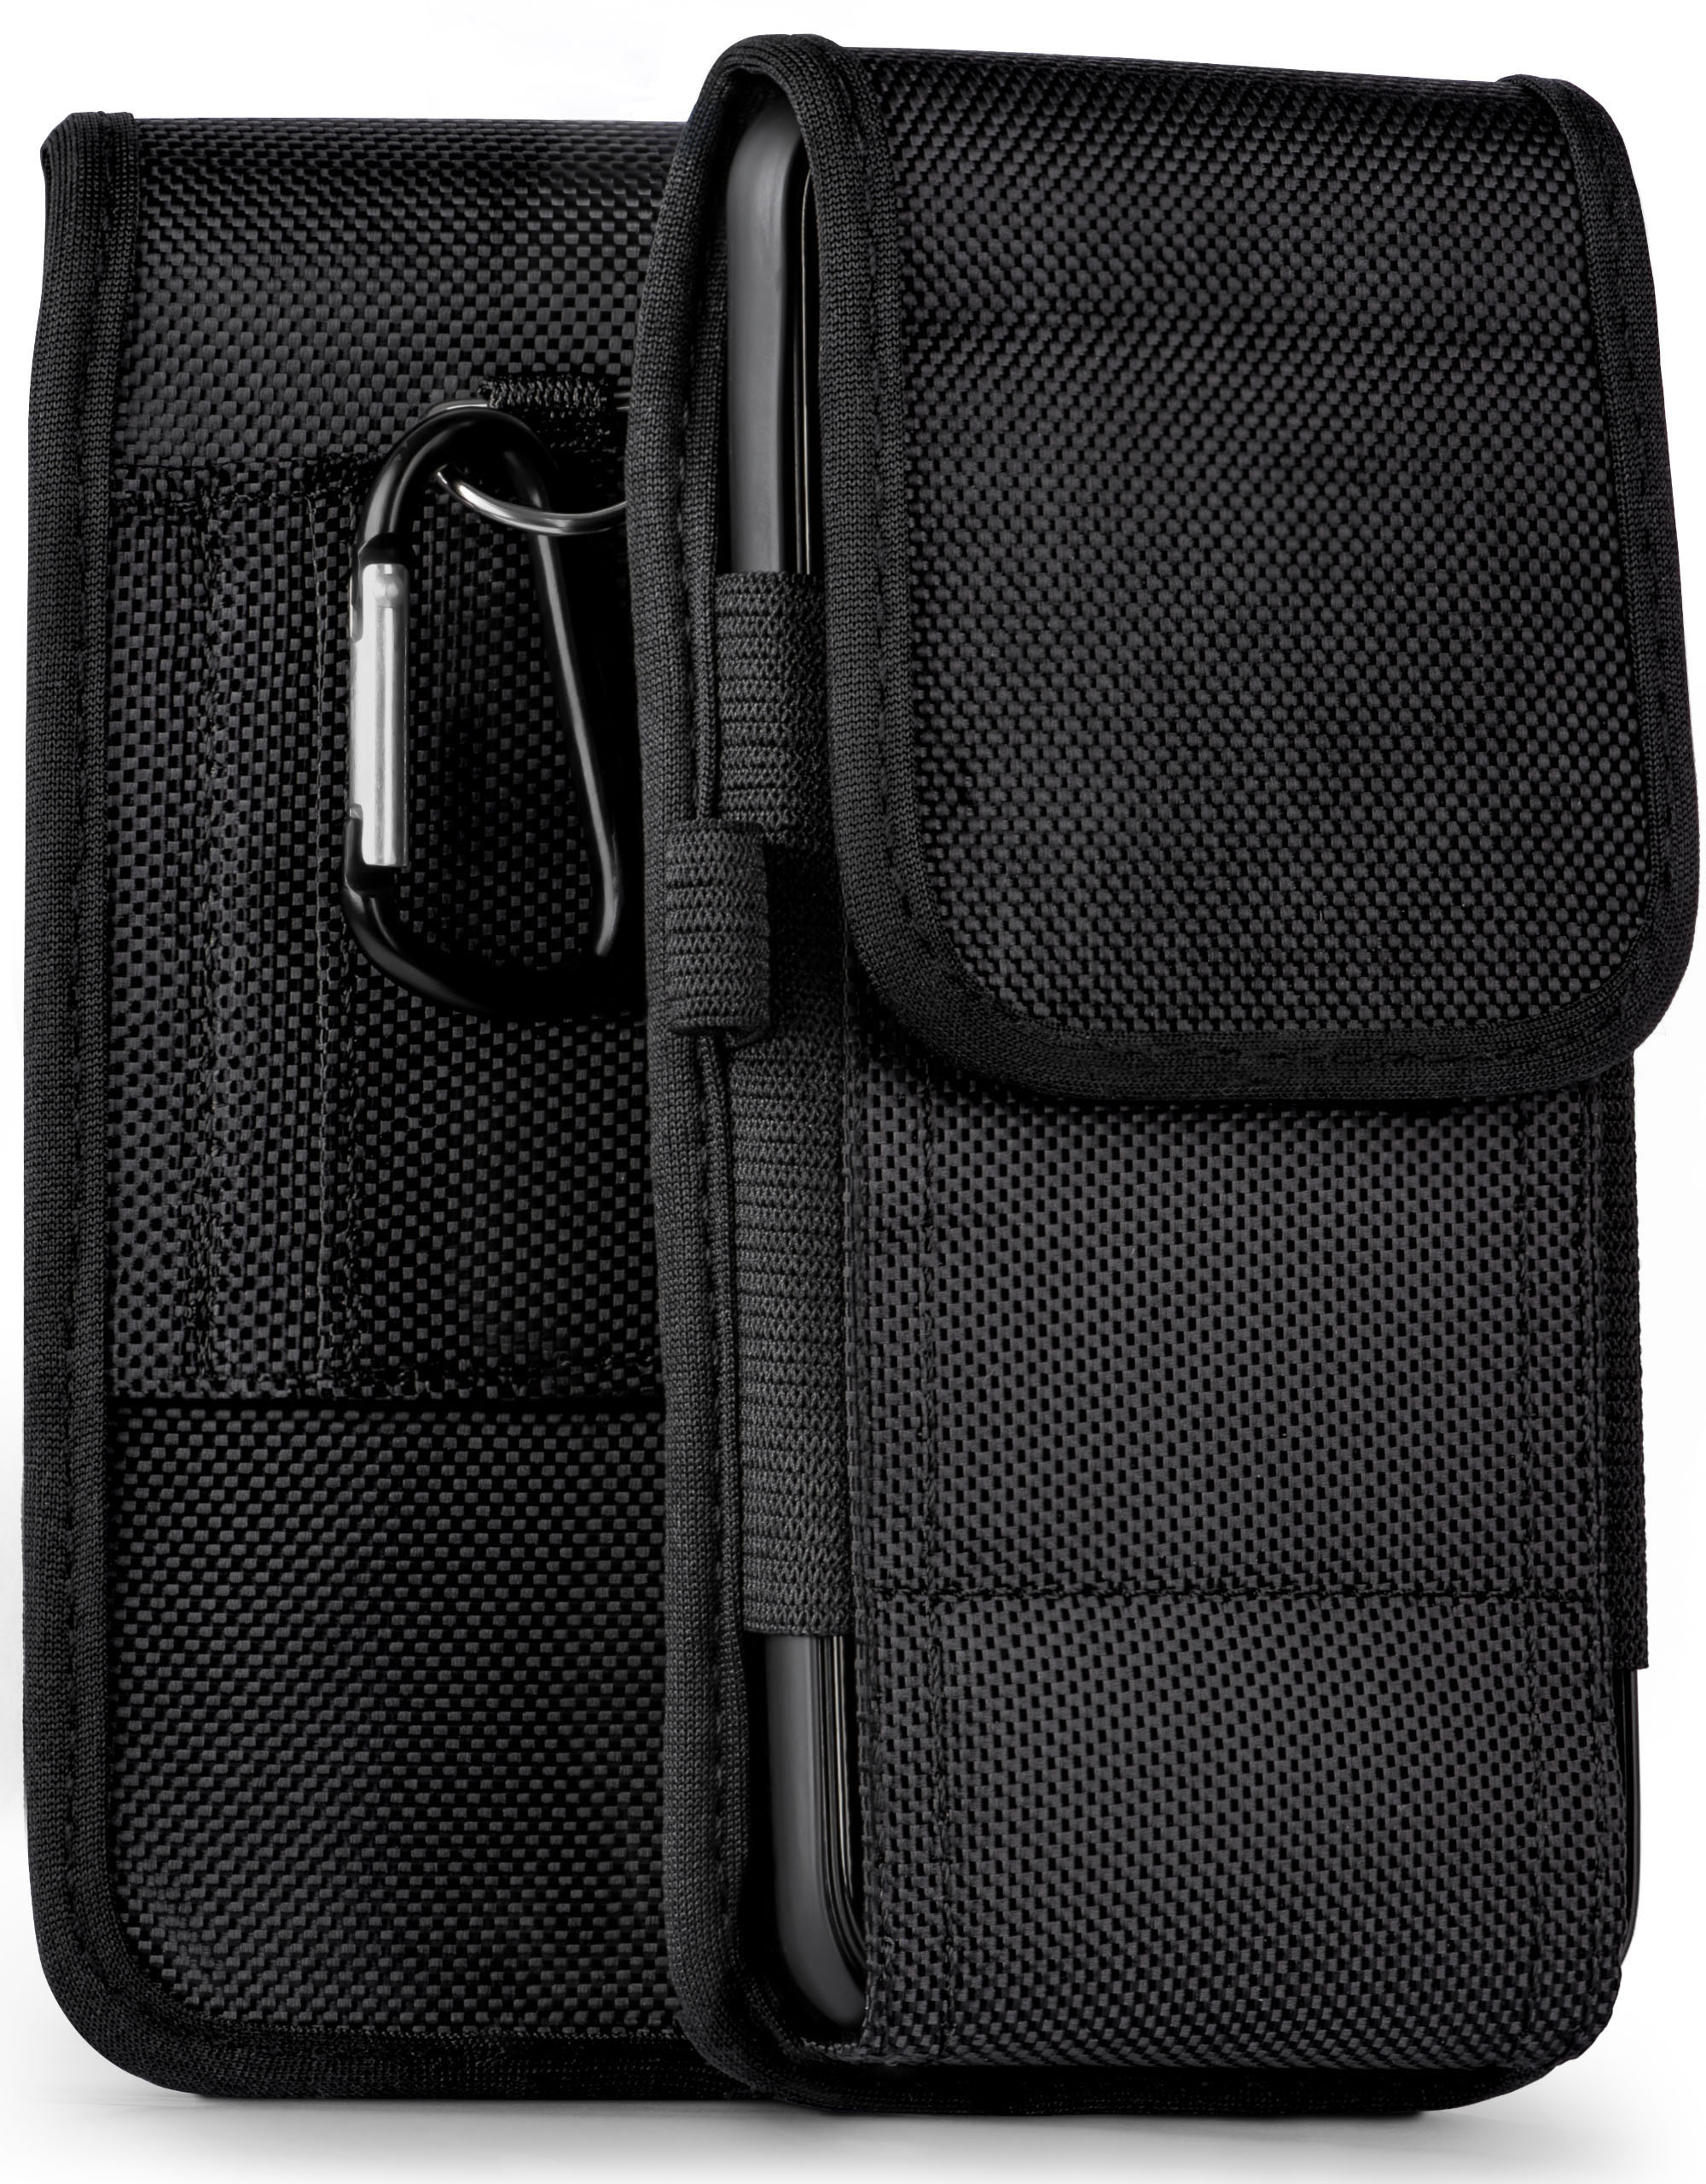 Trail Case, 1SE, MOEX Agility Alcatel, Holster,